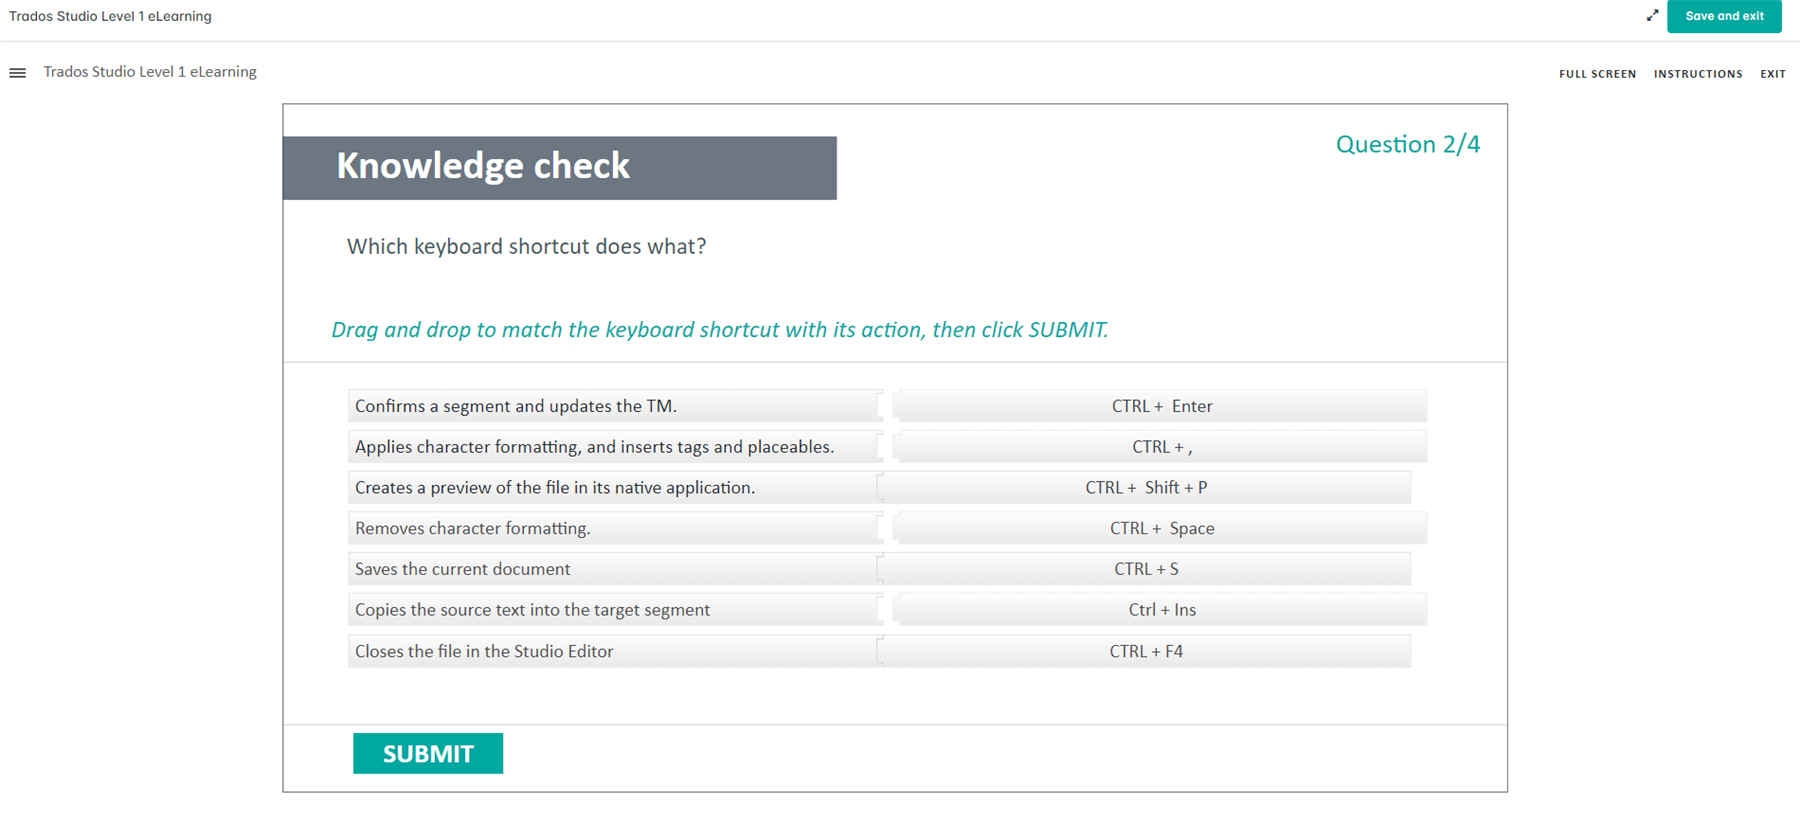 Trados Studio eLearning interface showing a 'Knowledge check' question where users must drag and drop keyboard shortcuts to their corresponding actions before clicking 'SUBMIT'.